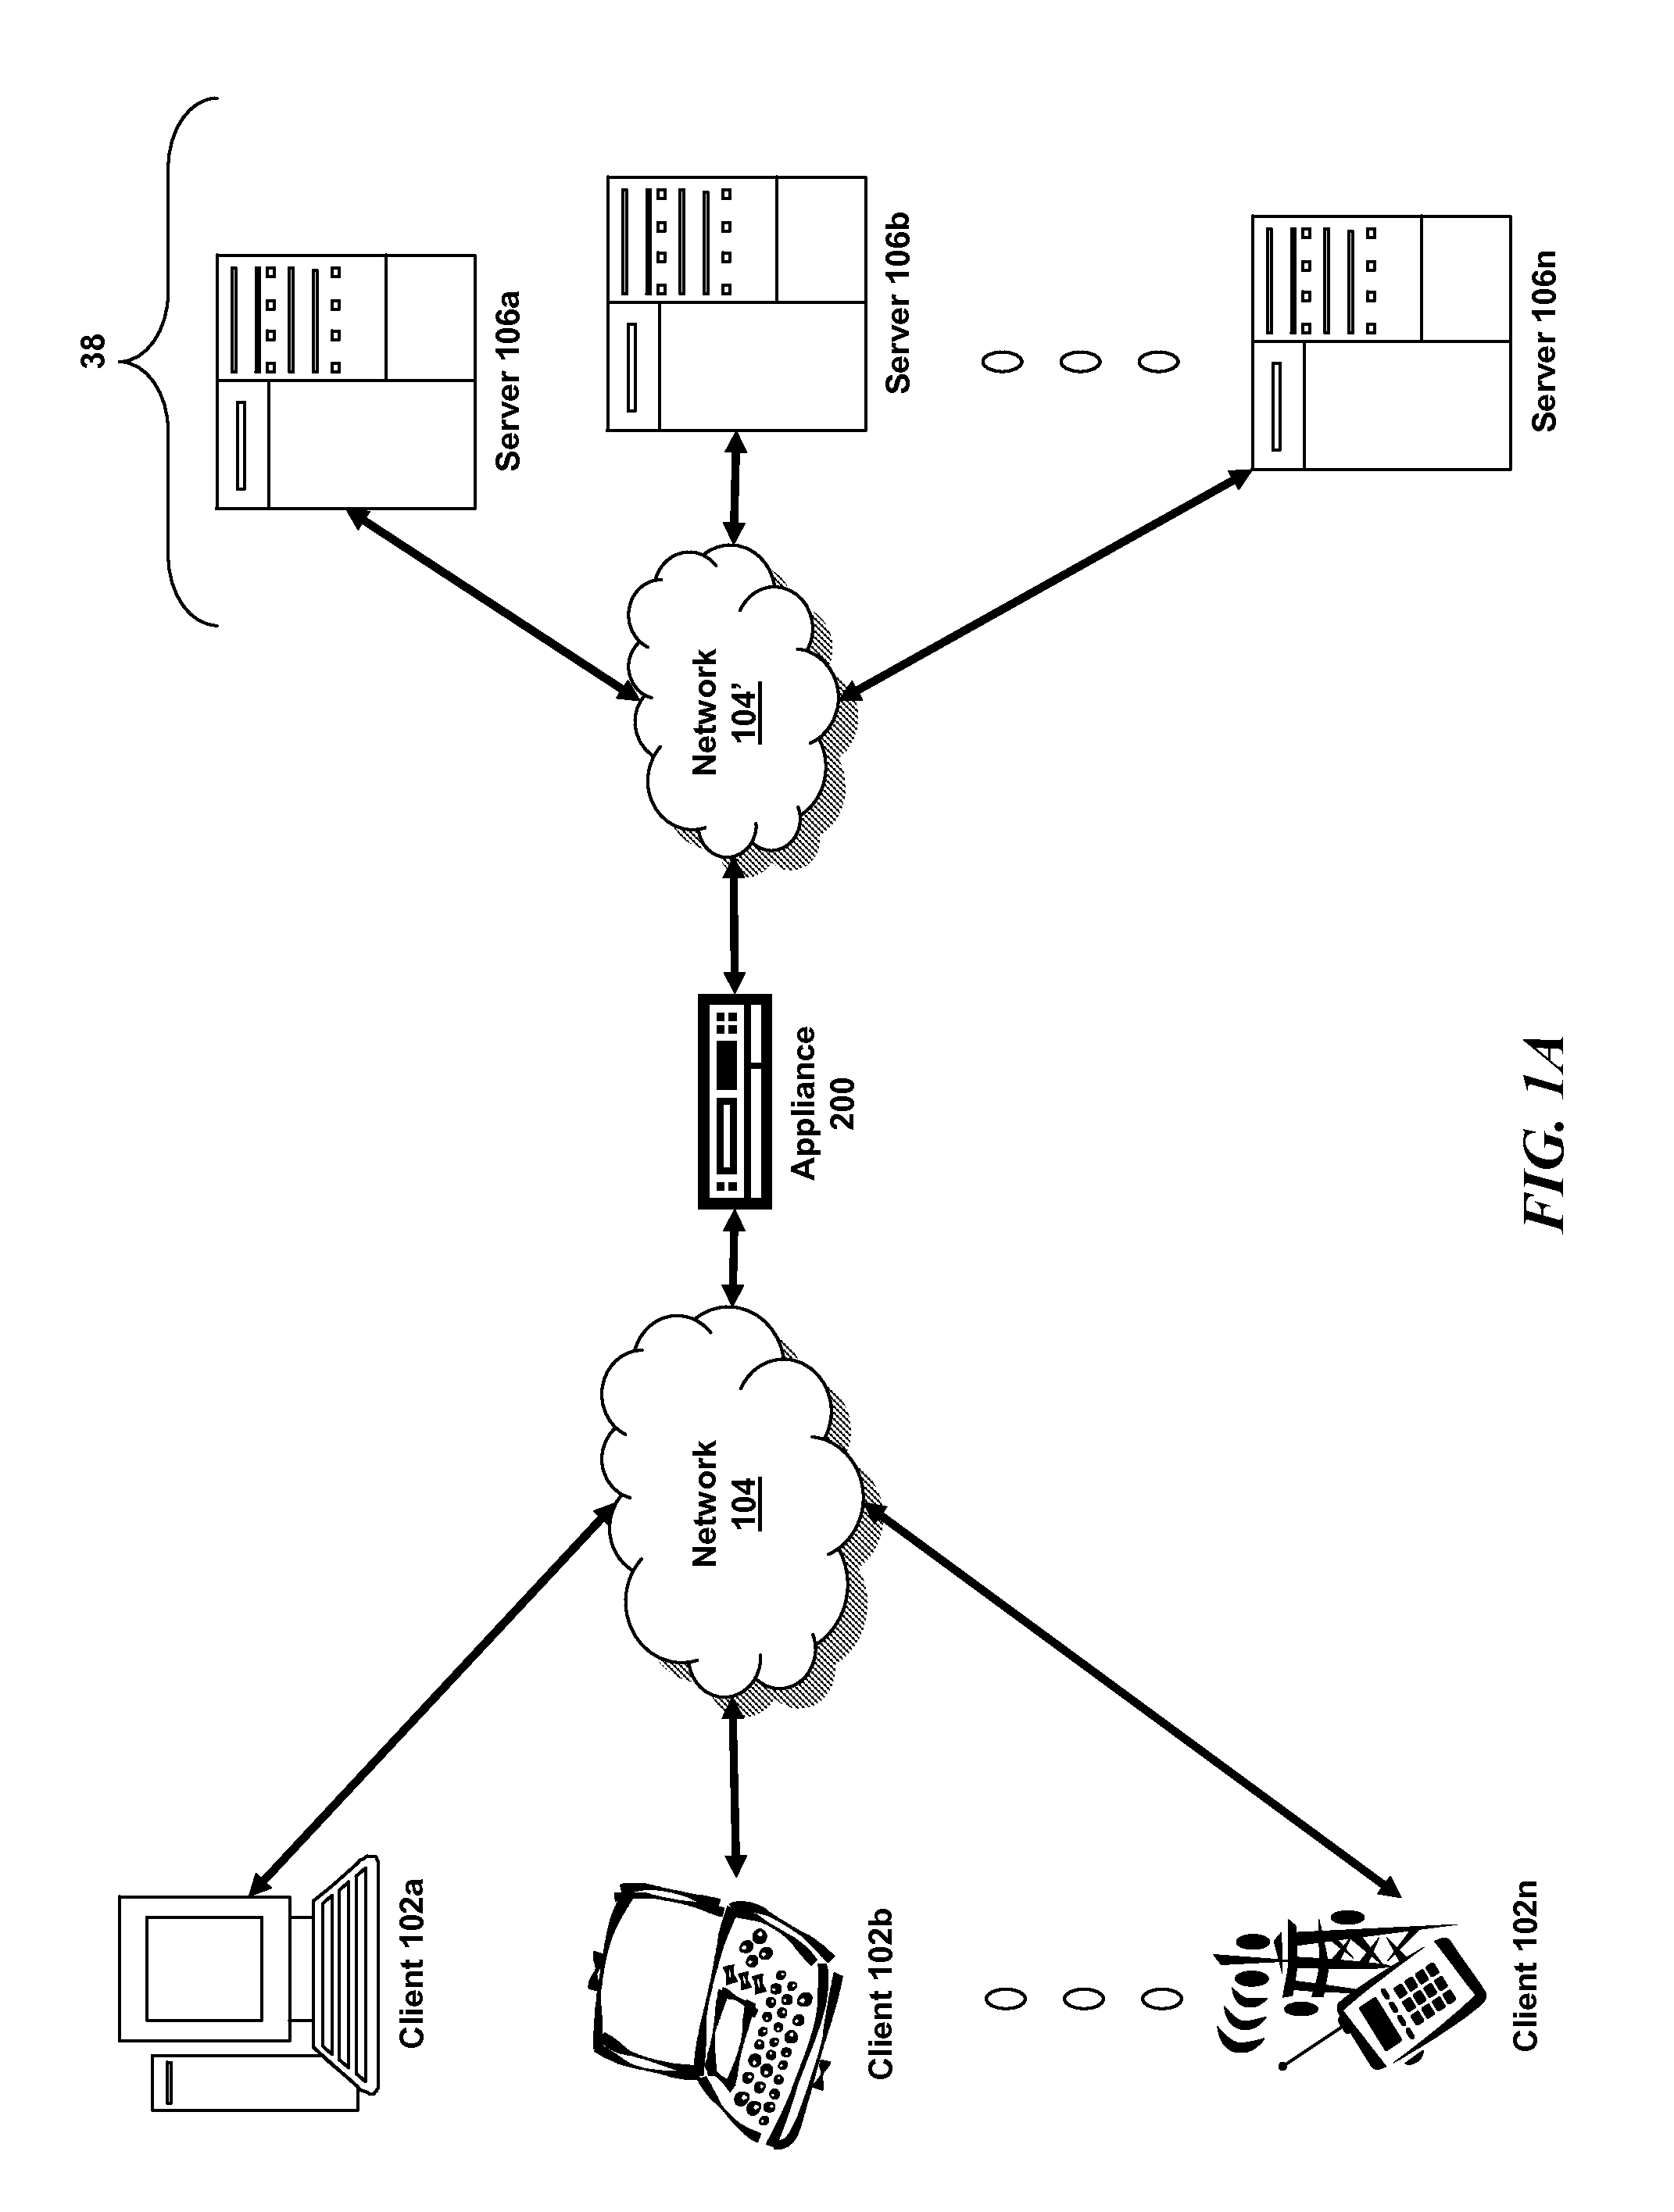 Systems and methods for server initiated connection management in a multi-core system